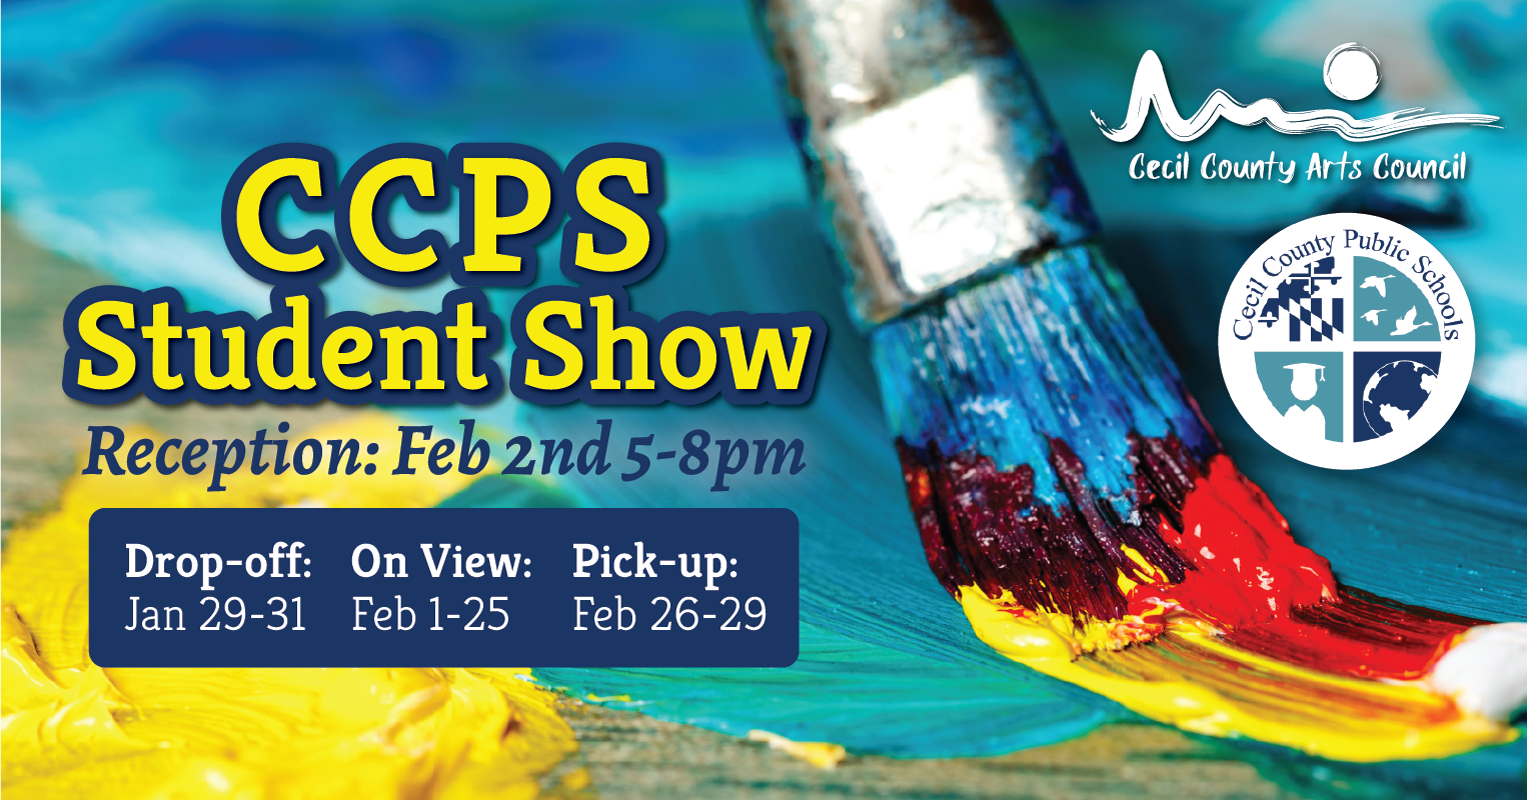 CCPS Student Show 2024 Call for Entries! Cecil County Arts Council